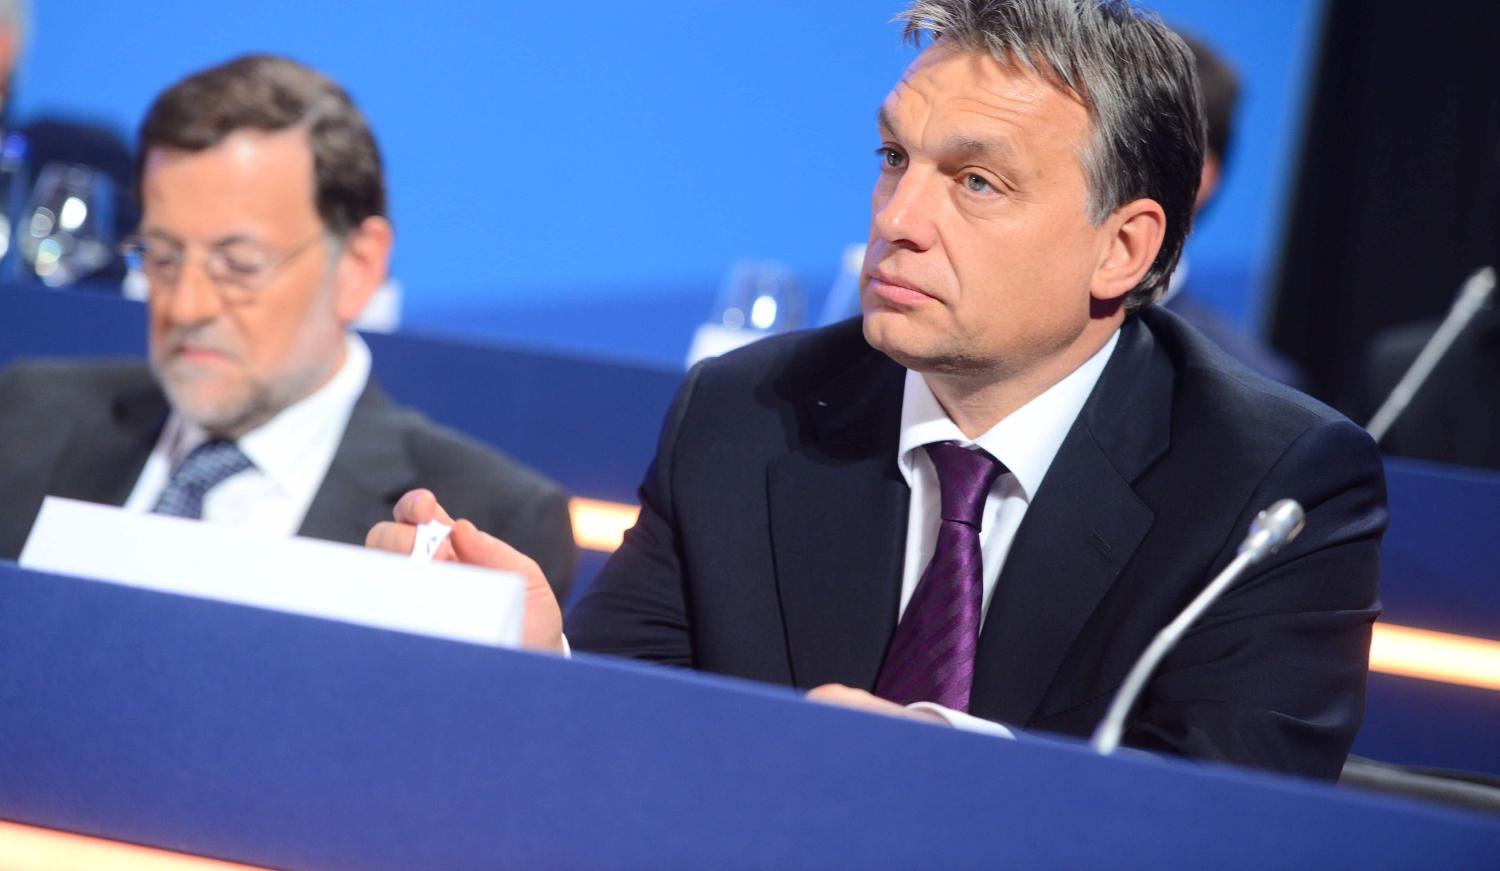 Prime Minister of Hungary Viktor Orbán (Photo: European People’s Party/Flickr)